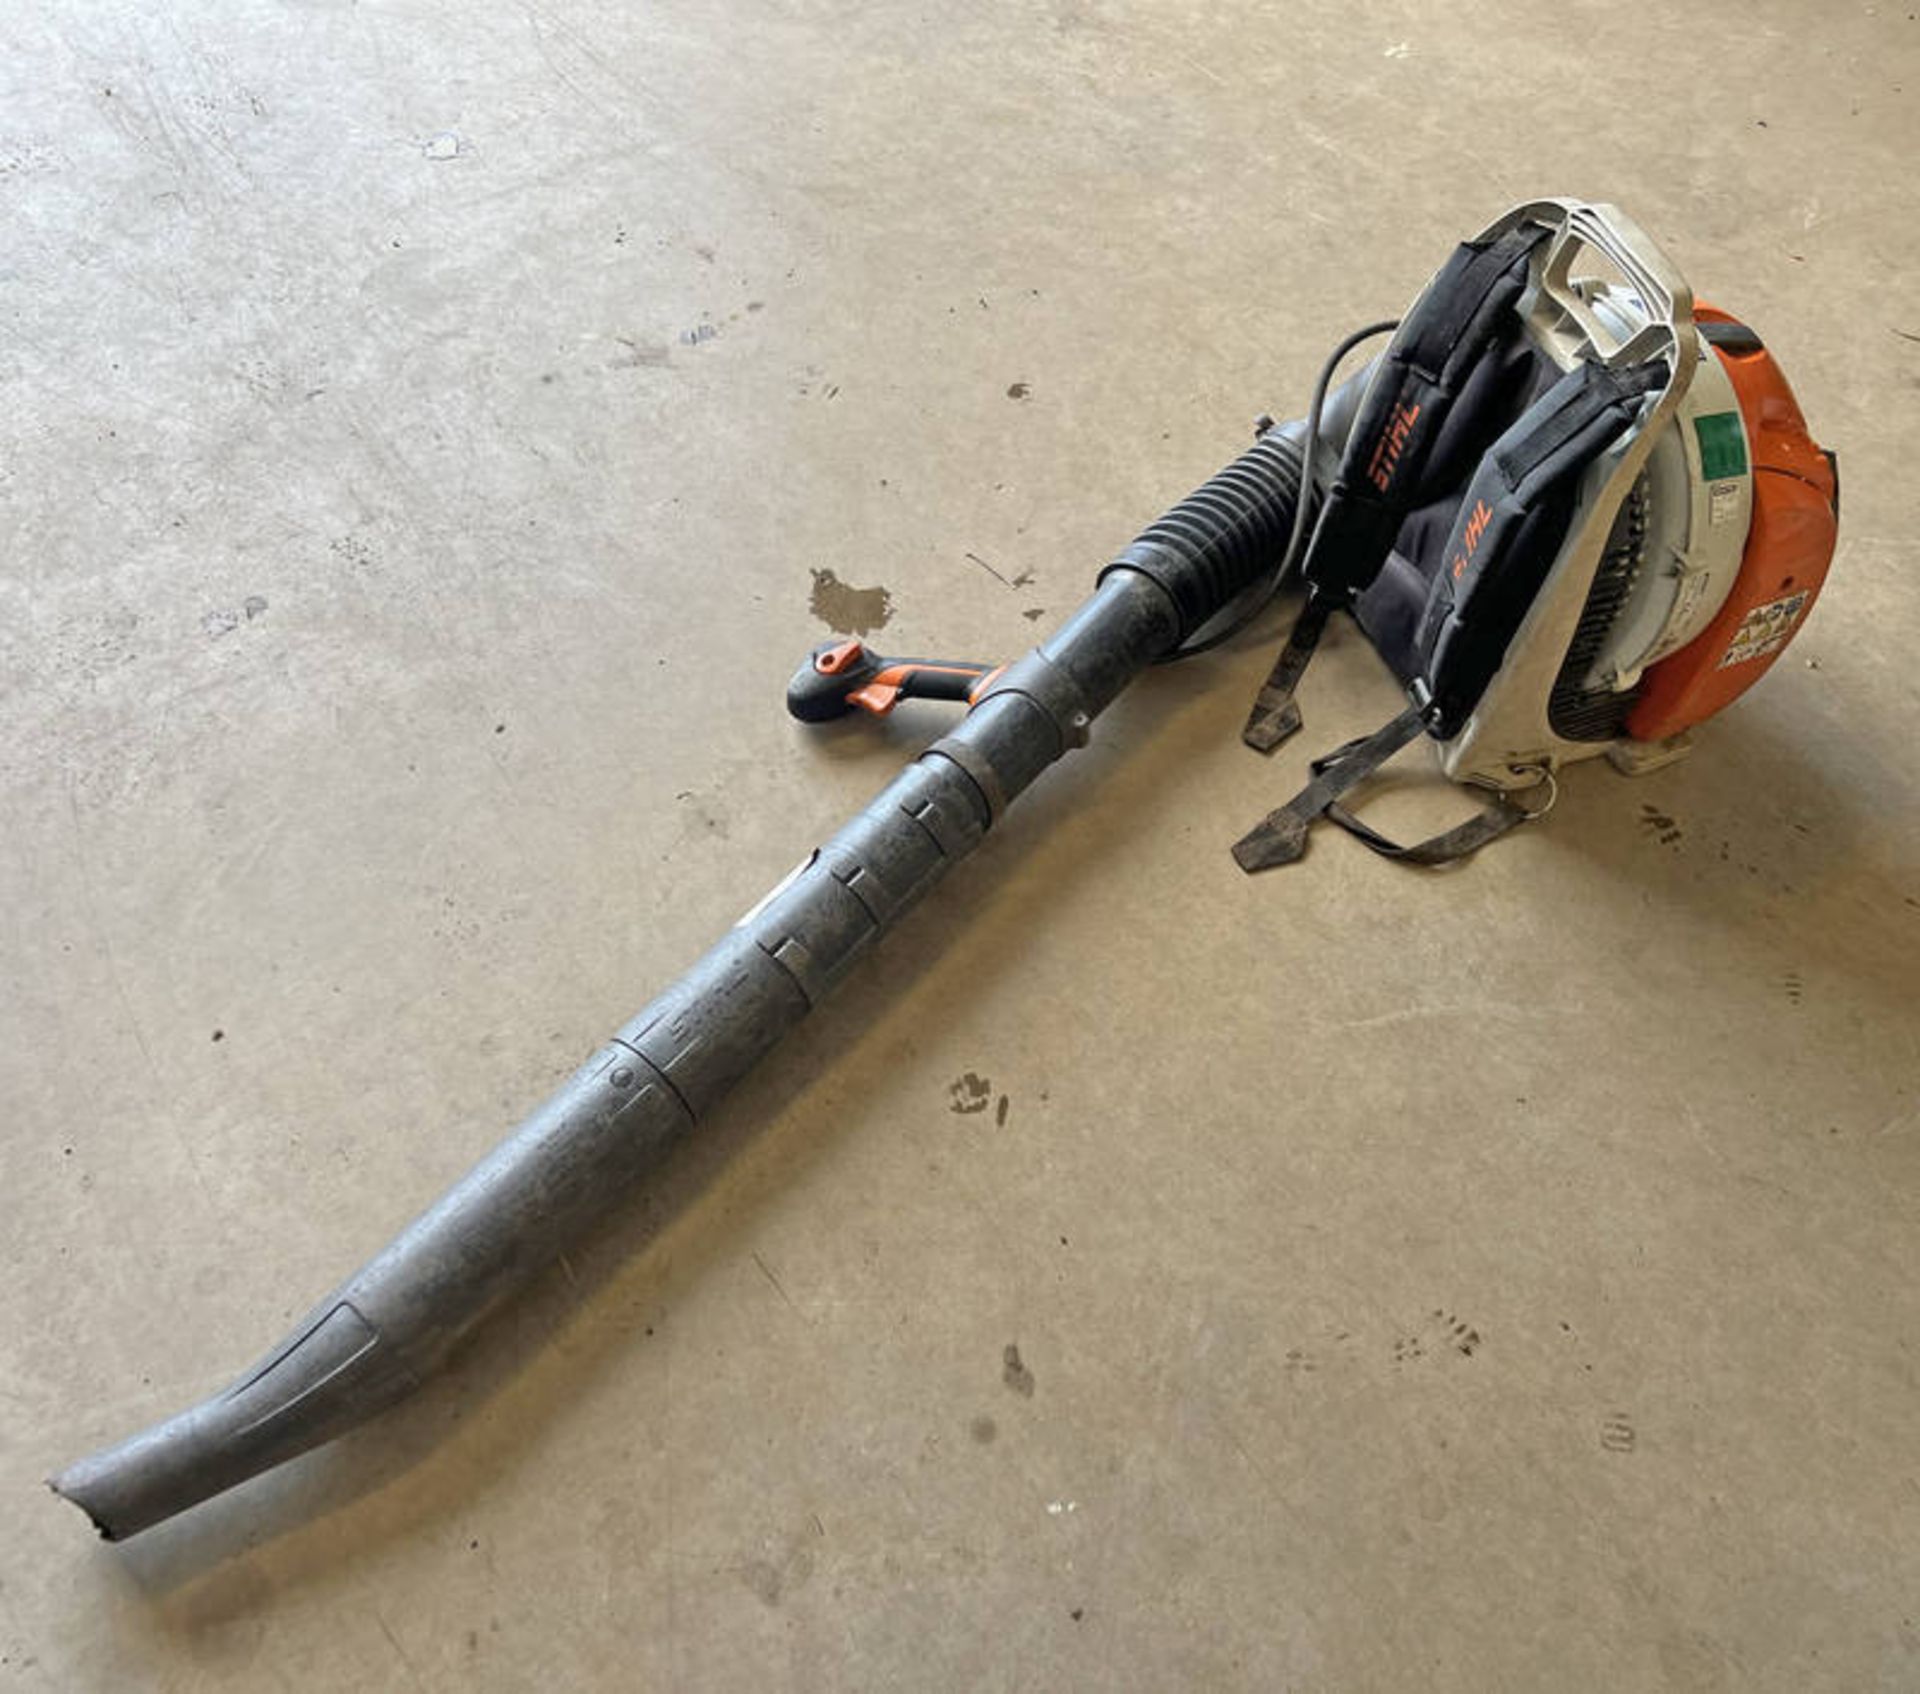 2019 STIHL BLOWER BR380 C-E 56CC BACK PACK LEAF BLOWER **TO BE SOLD PLUS VAT ON THE HAMMER**